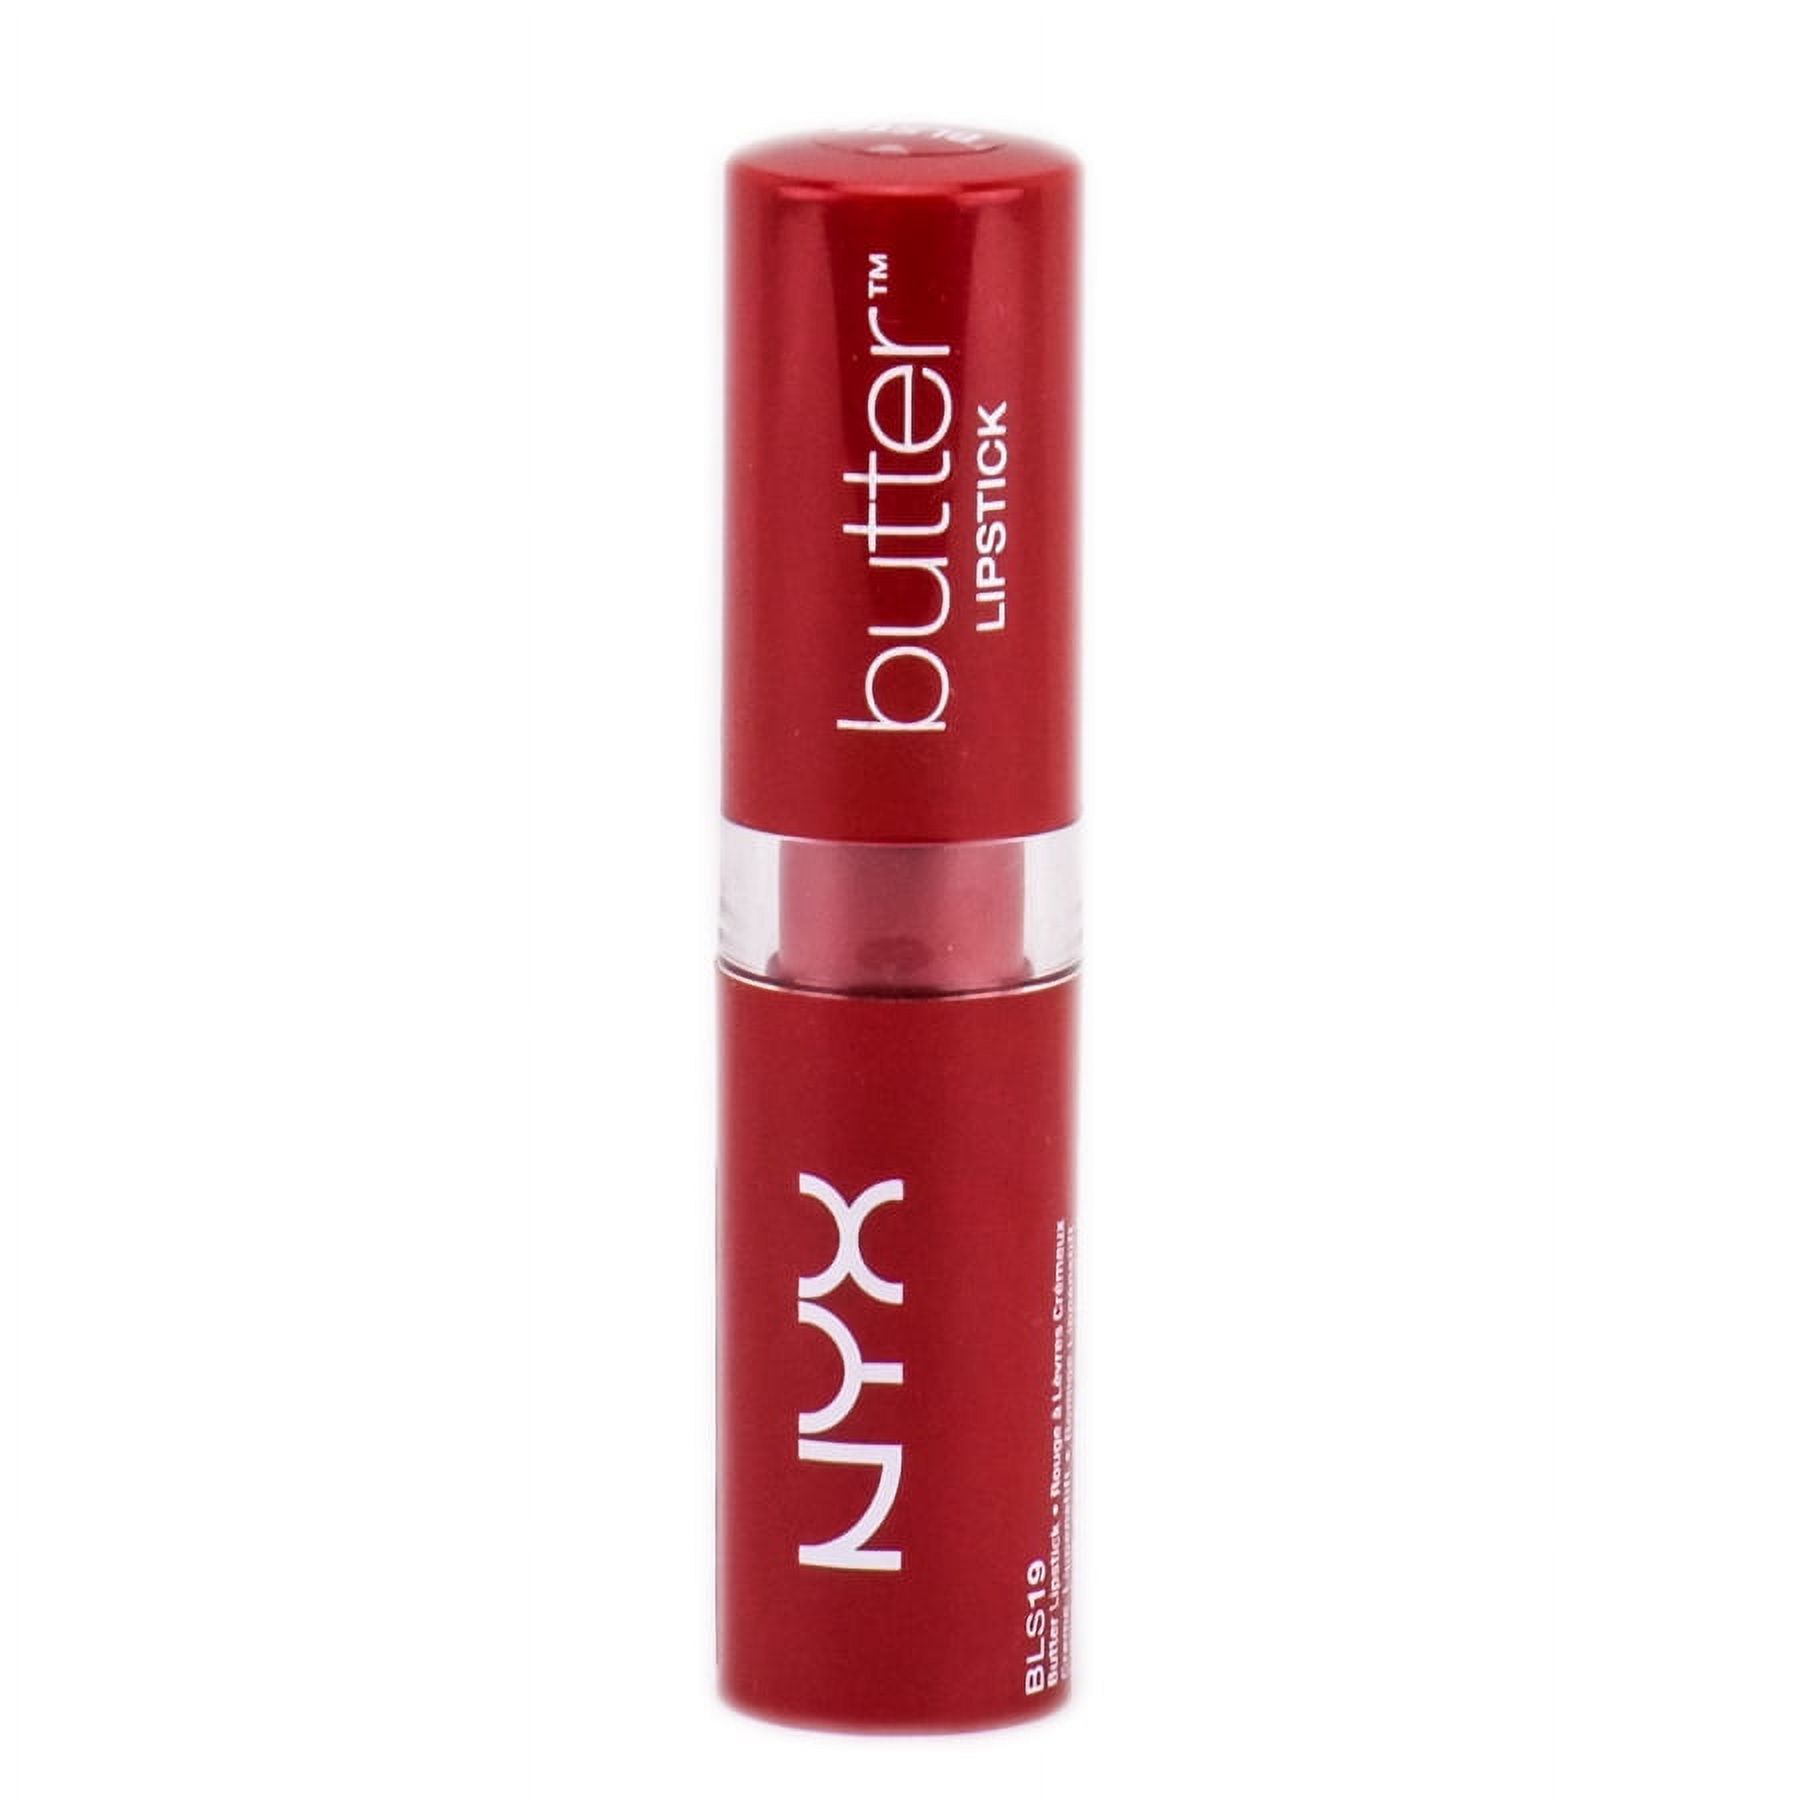 NYX Professional Makeup Butter Lipstick, Fire Brick - image 1 of 2